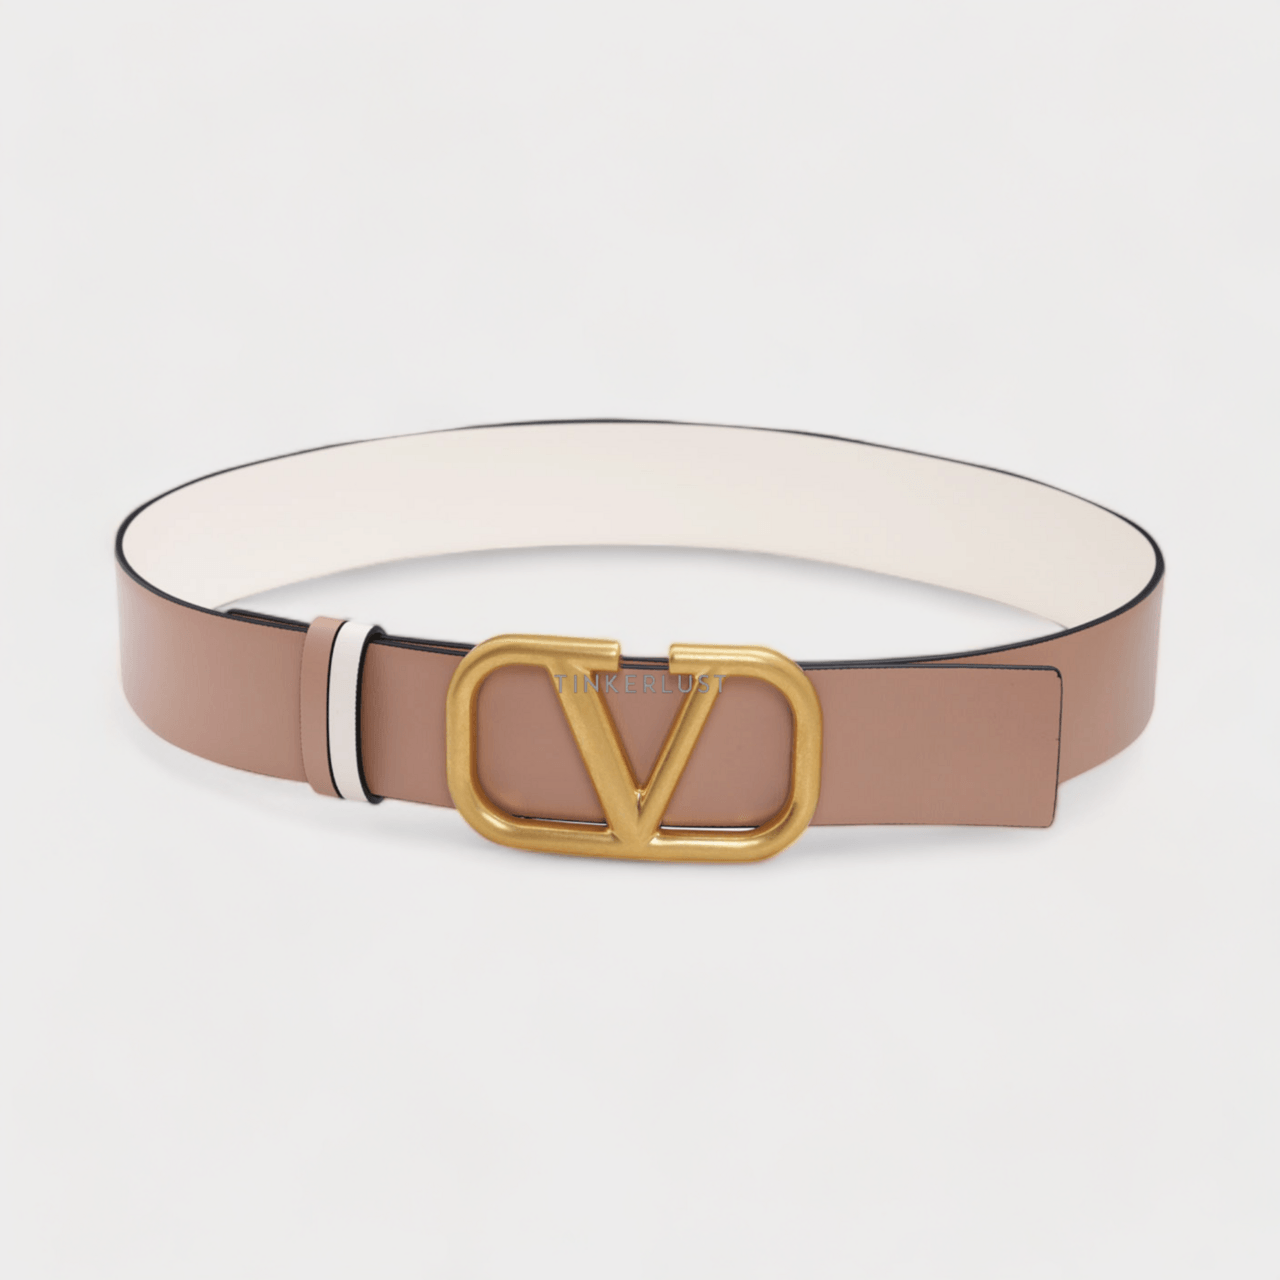 Valentino Reversible Belt 4cm in Light Ivory/Rose Cannelle Leather with VLogo Buckle